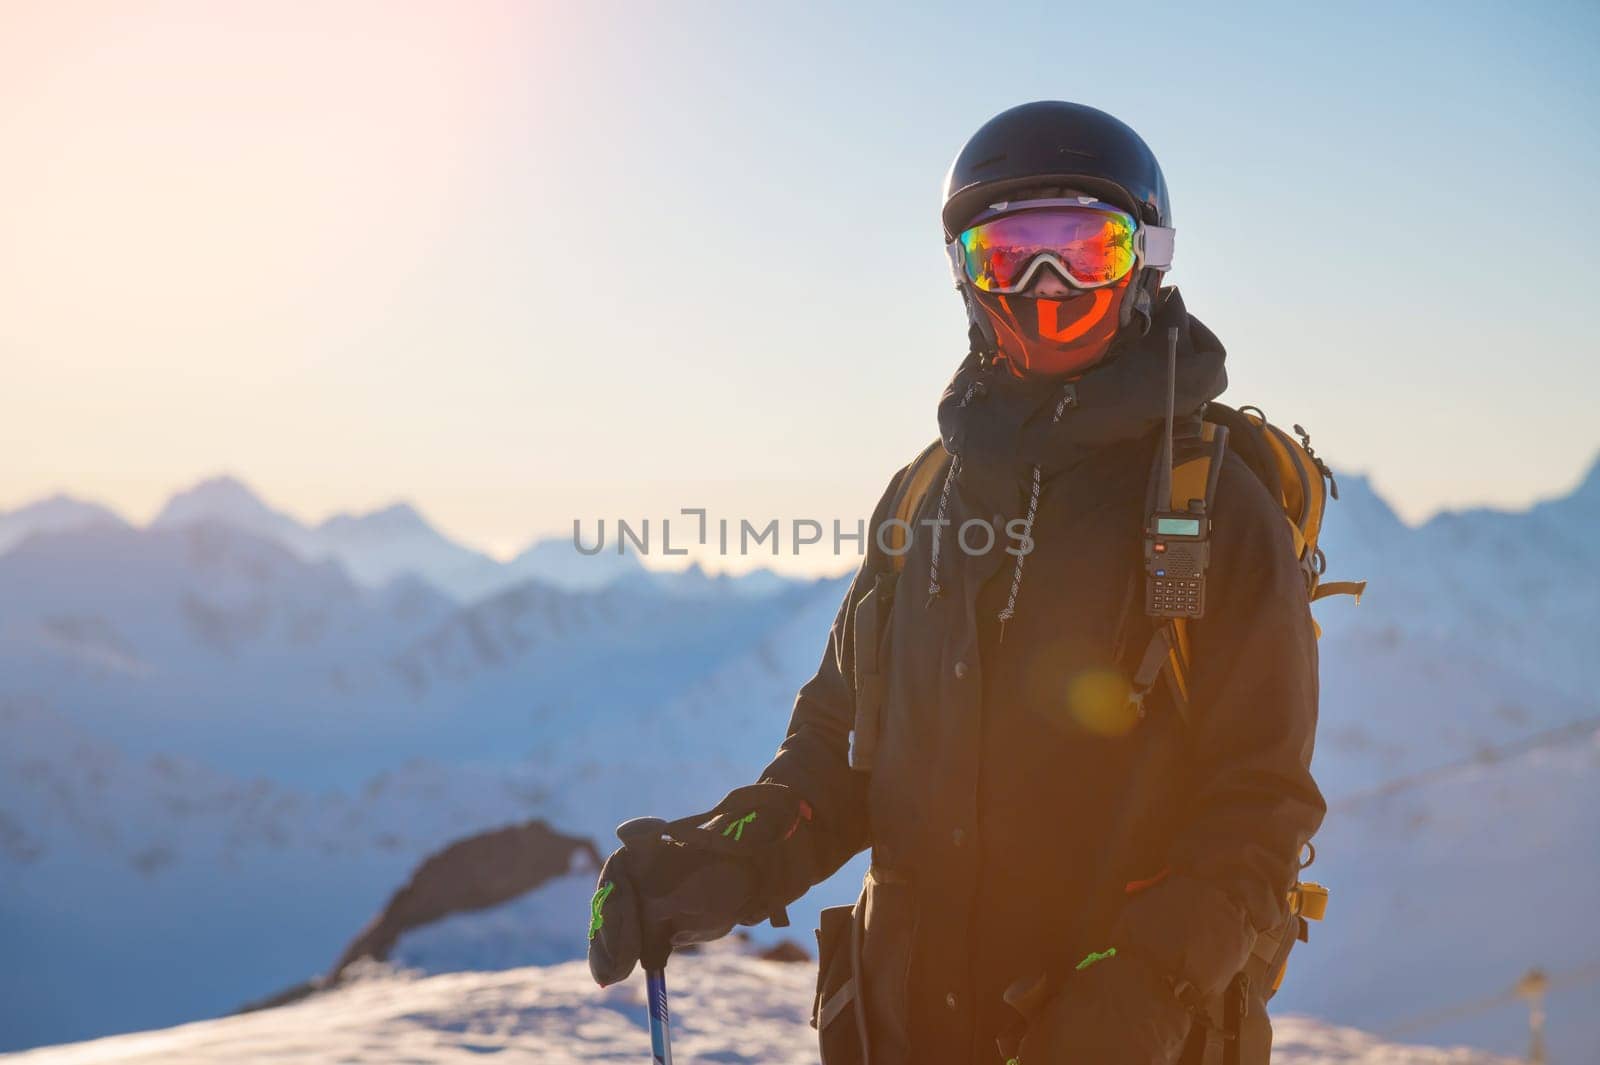 Portrait of a skier on the mountain at sunset. Portrait of a woman in a ski resort against the backdrop of mountains and blue sky. Winter sports, security, protection and radio communication.